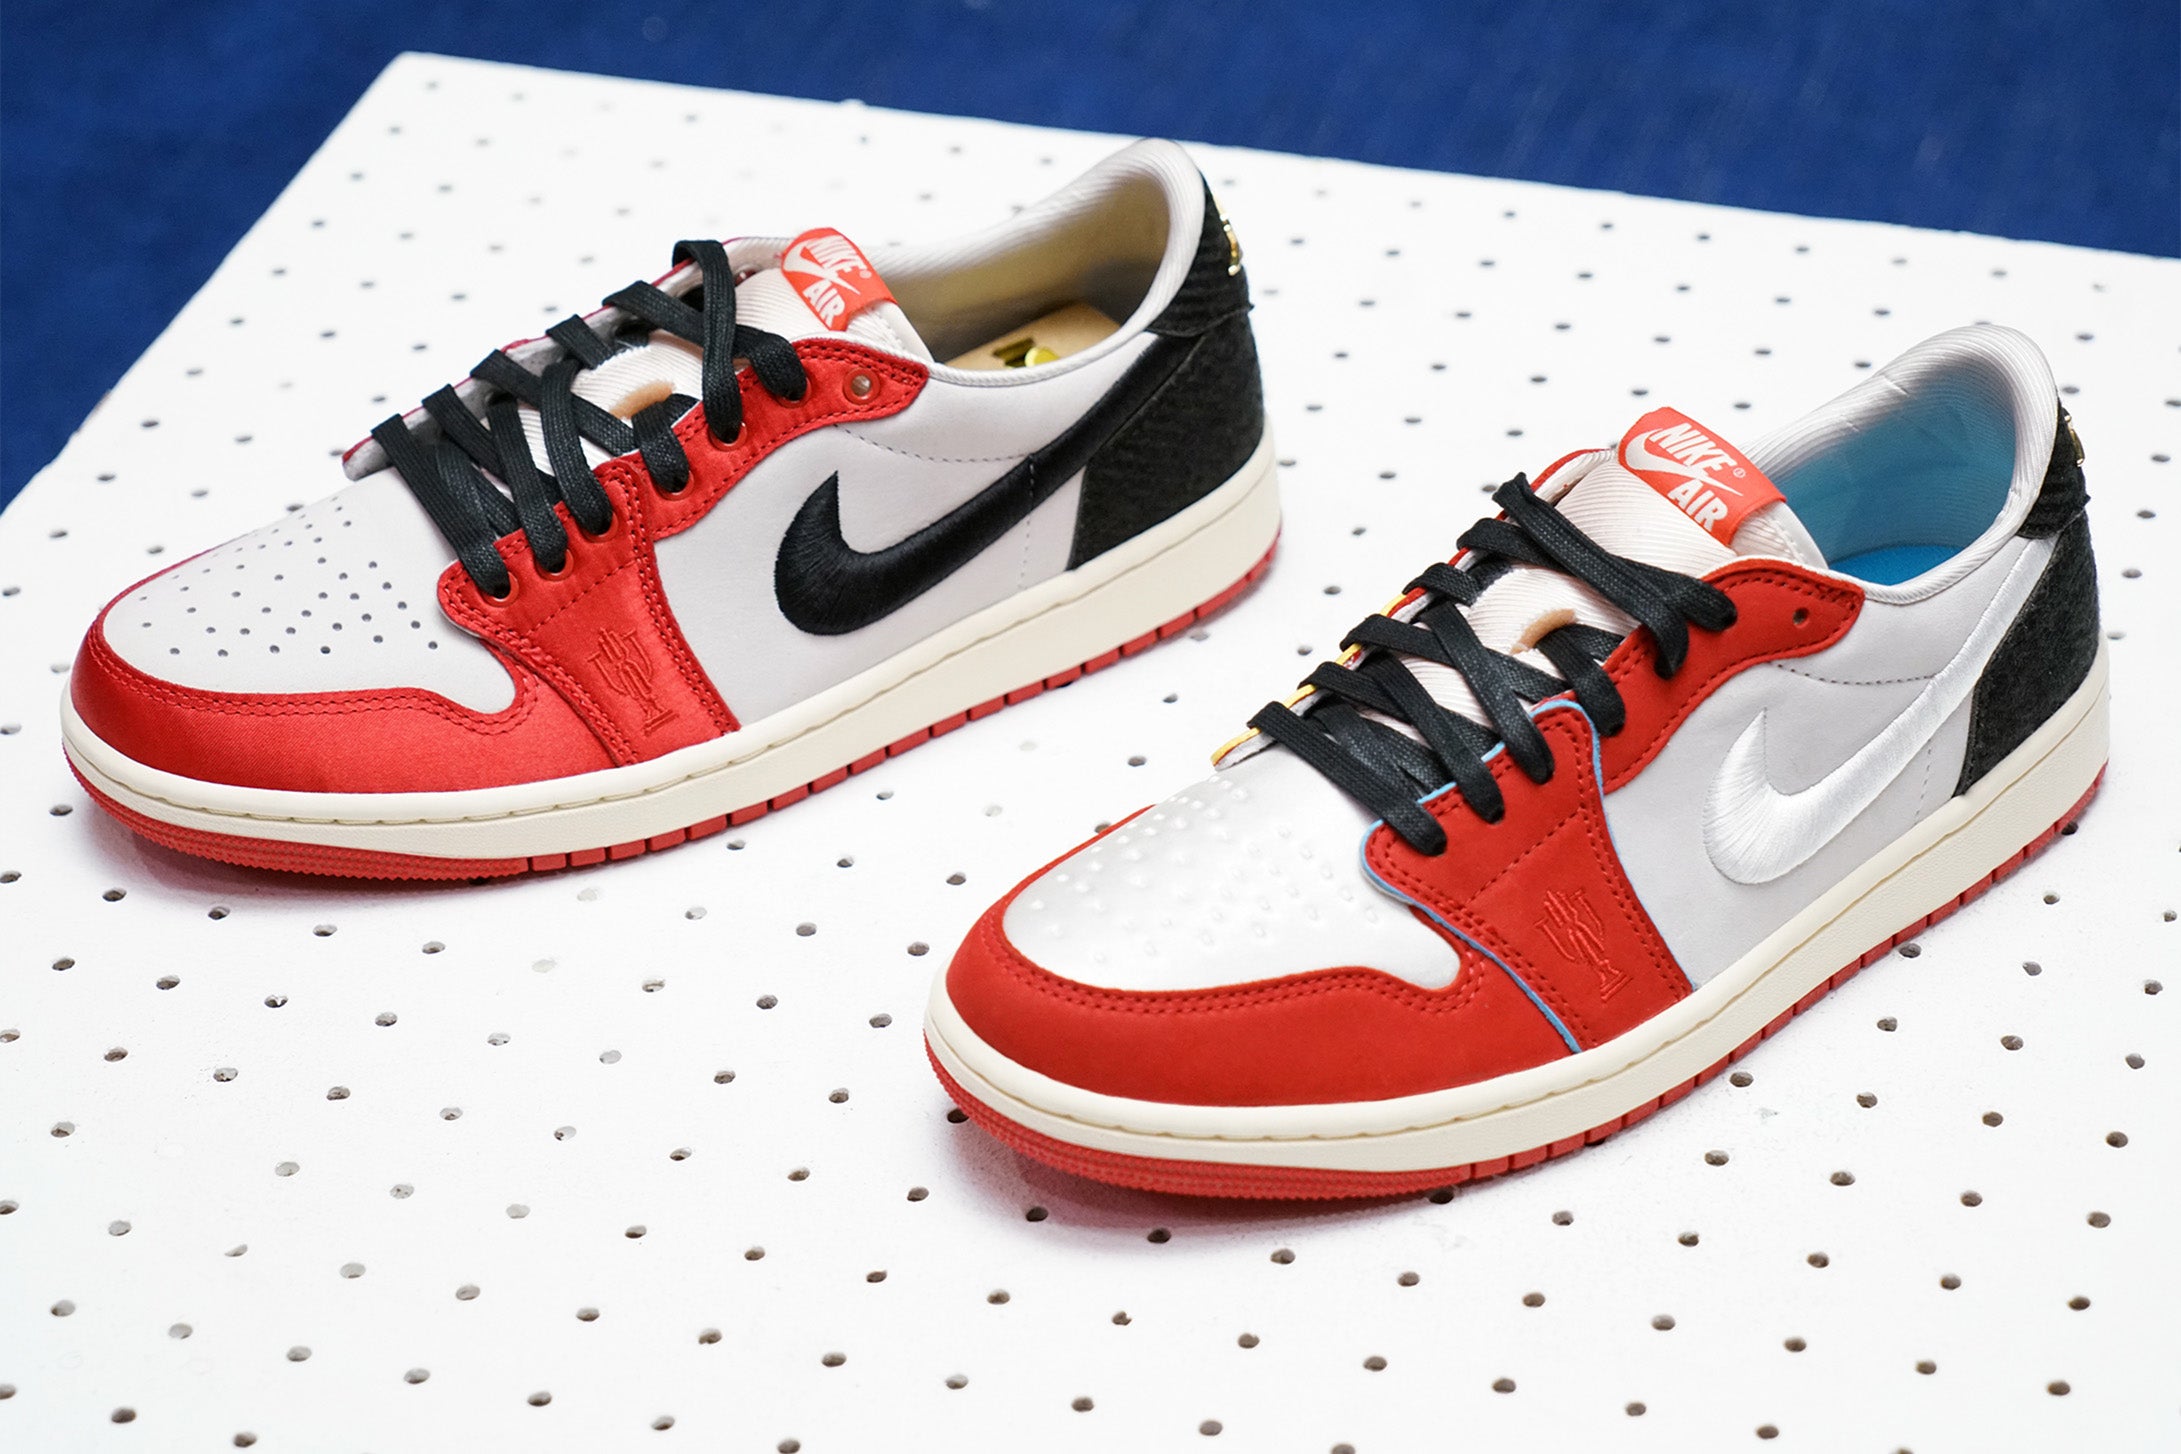 Ebay launches first community sneaker drop